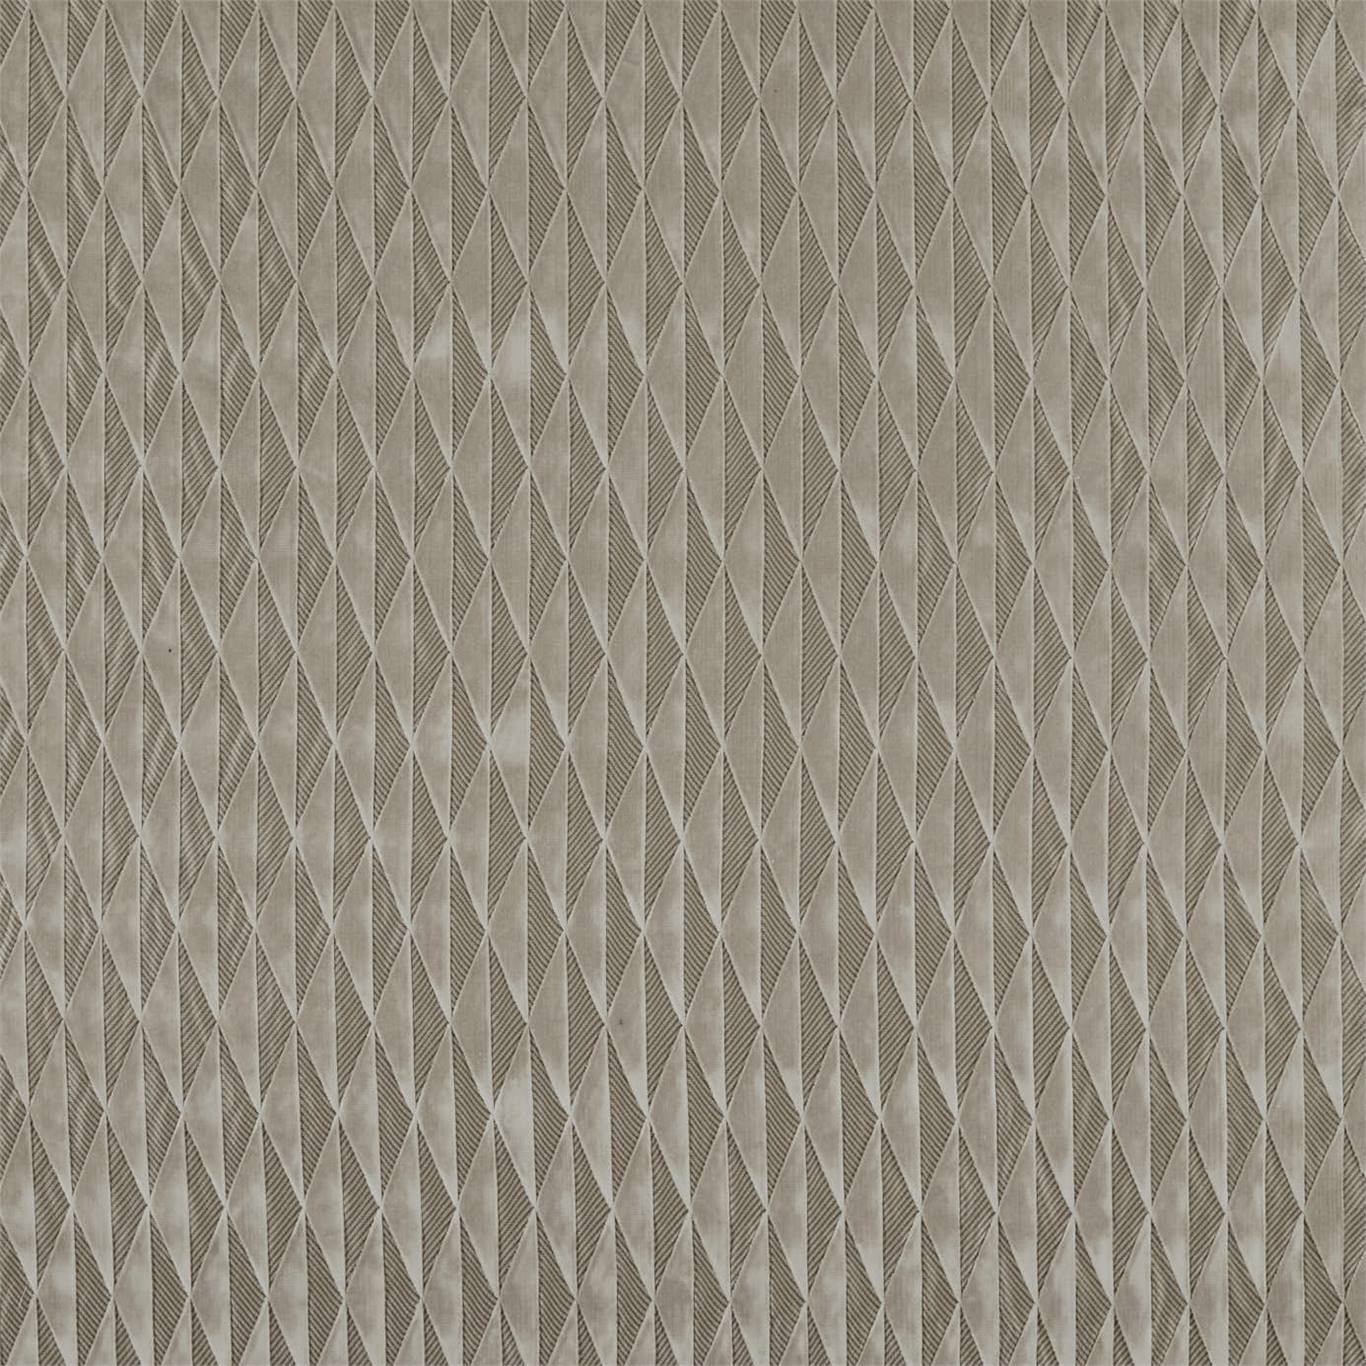 Irradiant Oyster Fabric by HAR